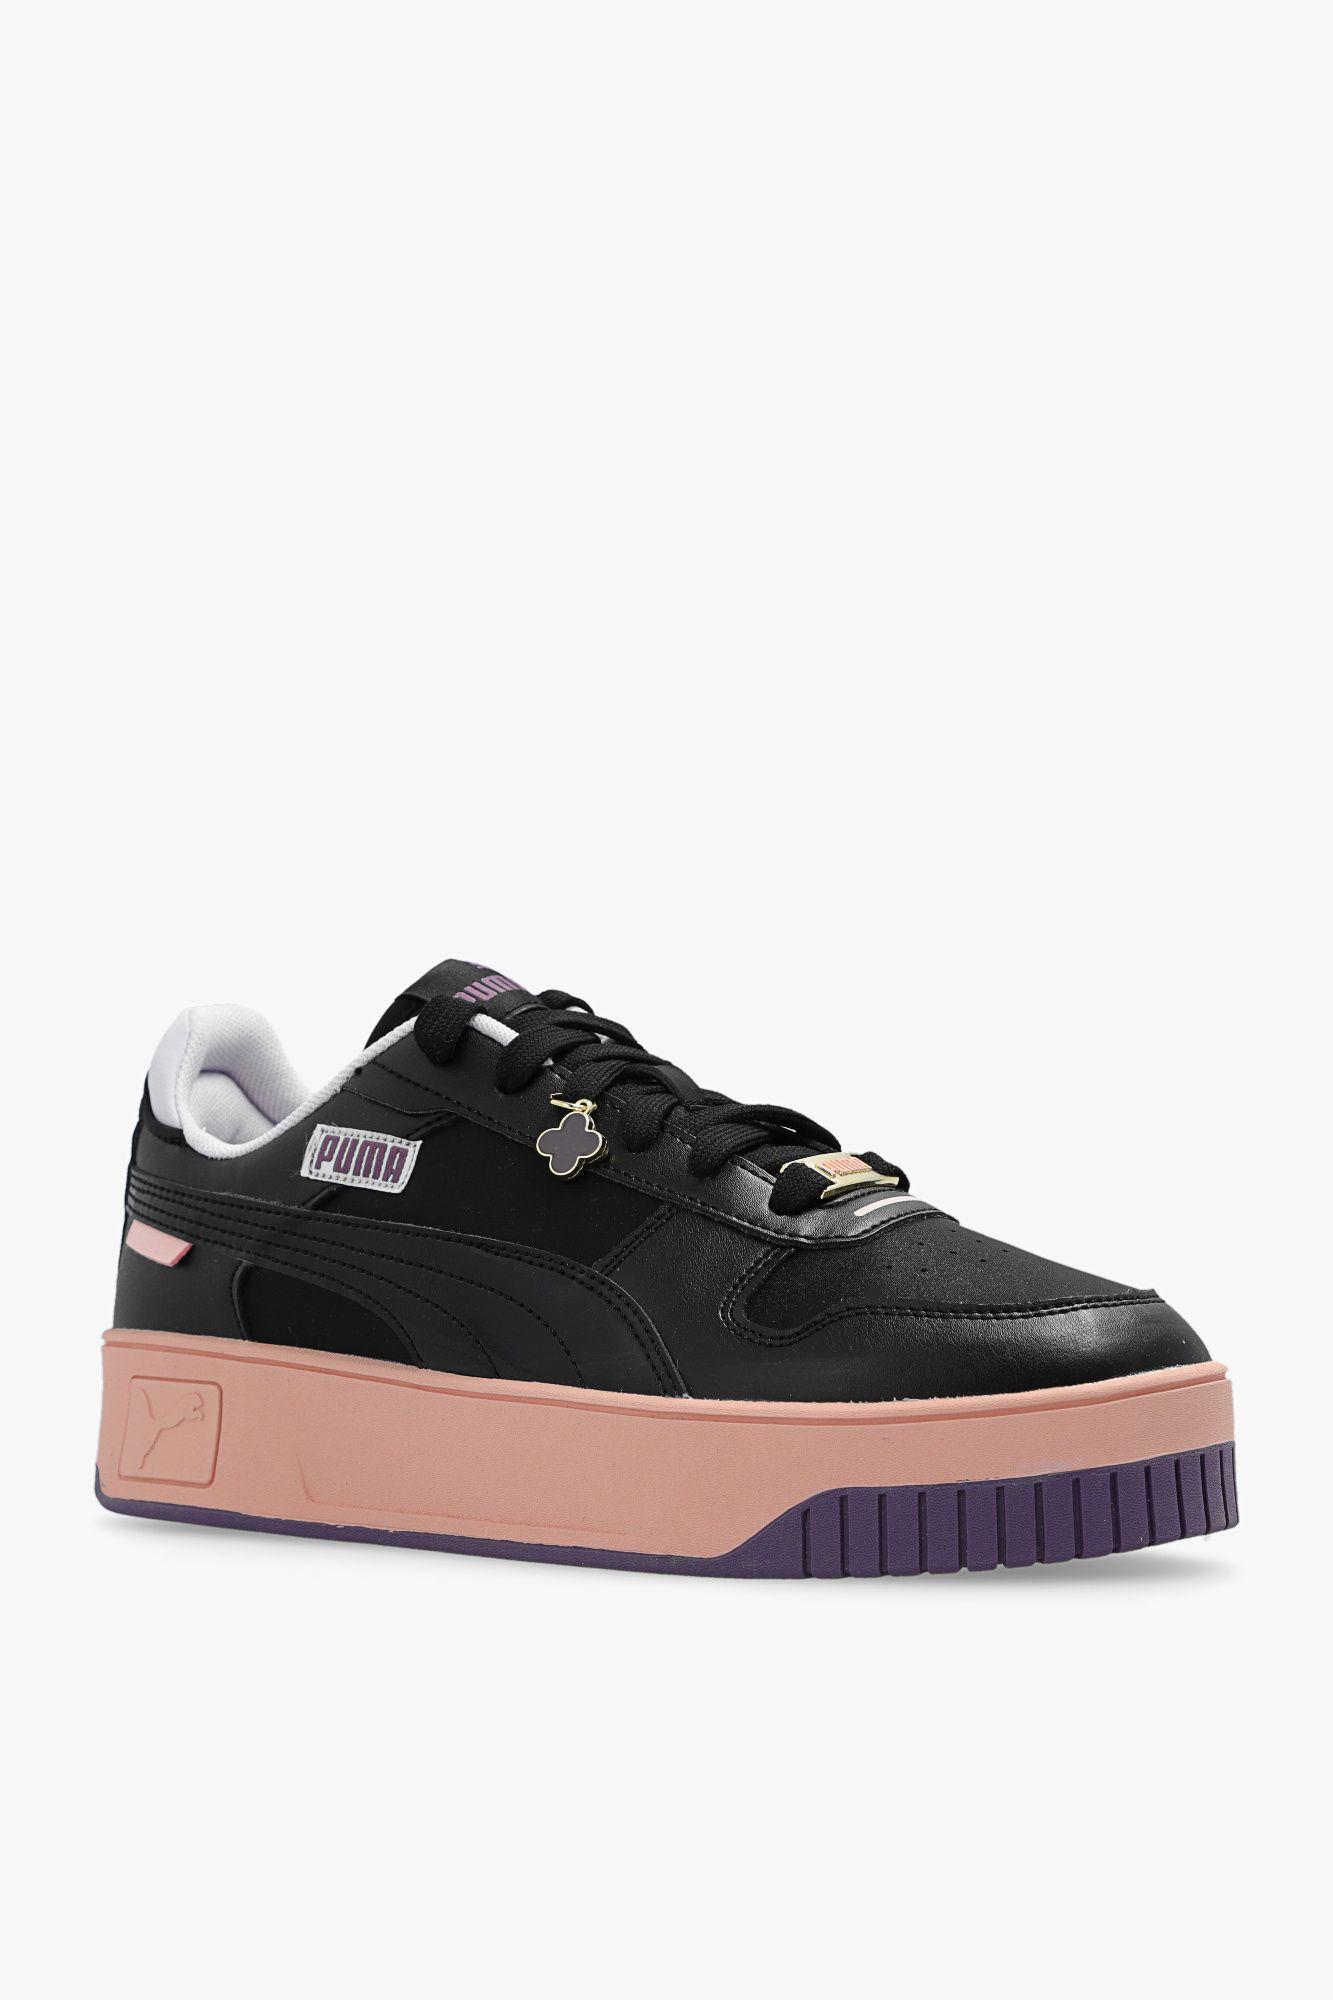 PUMA 'carina Street Charms' Sneakers in Black | Lyst